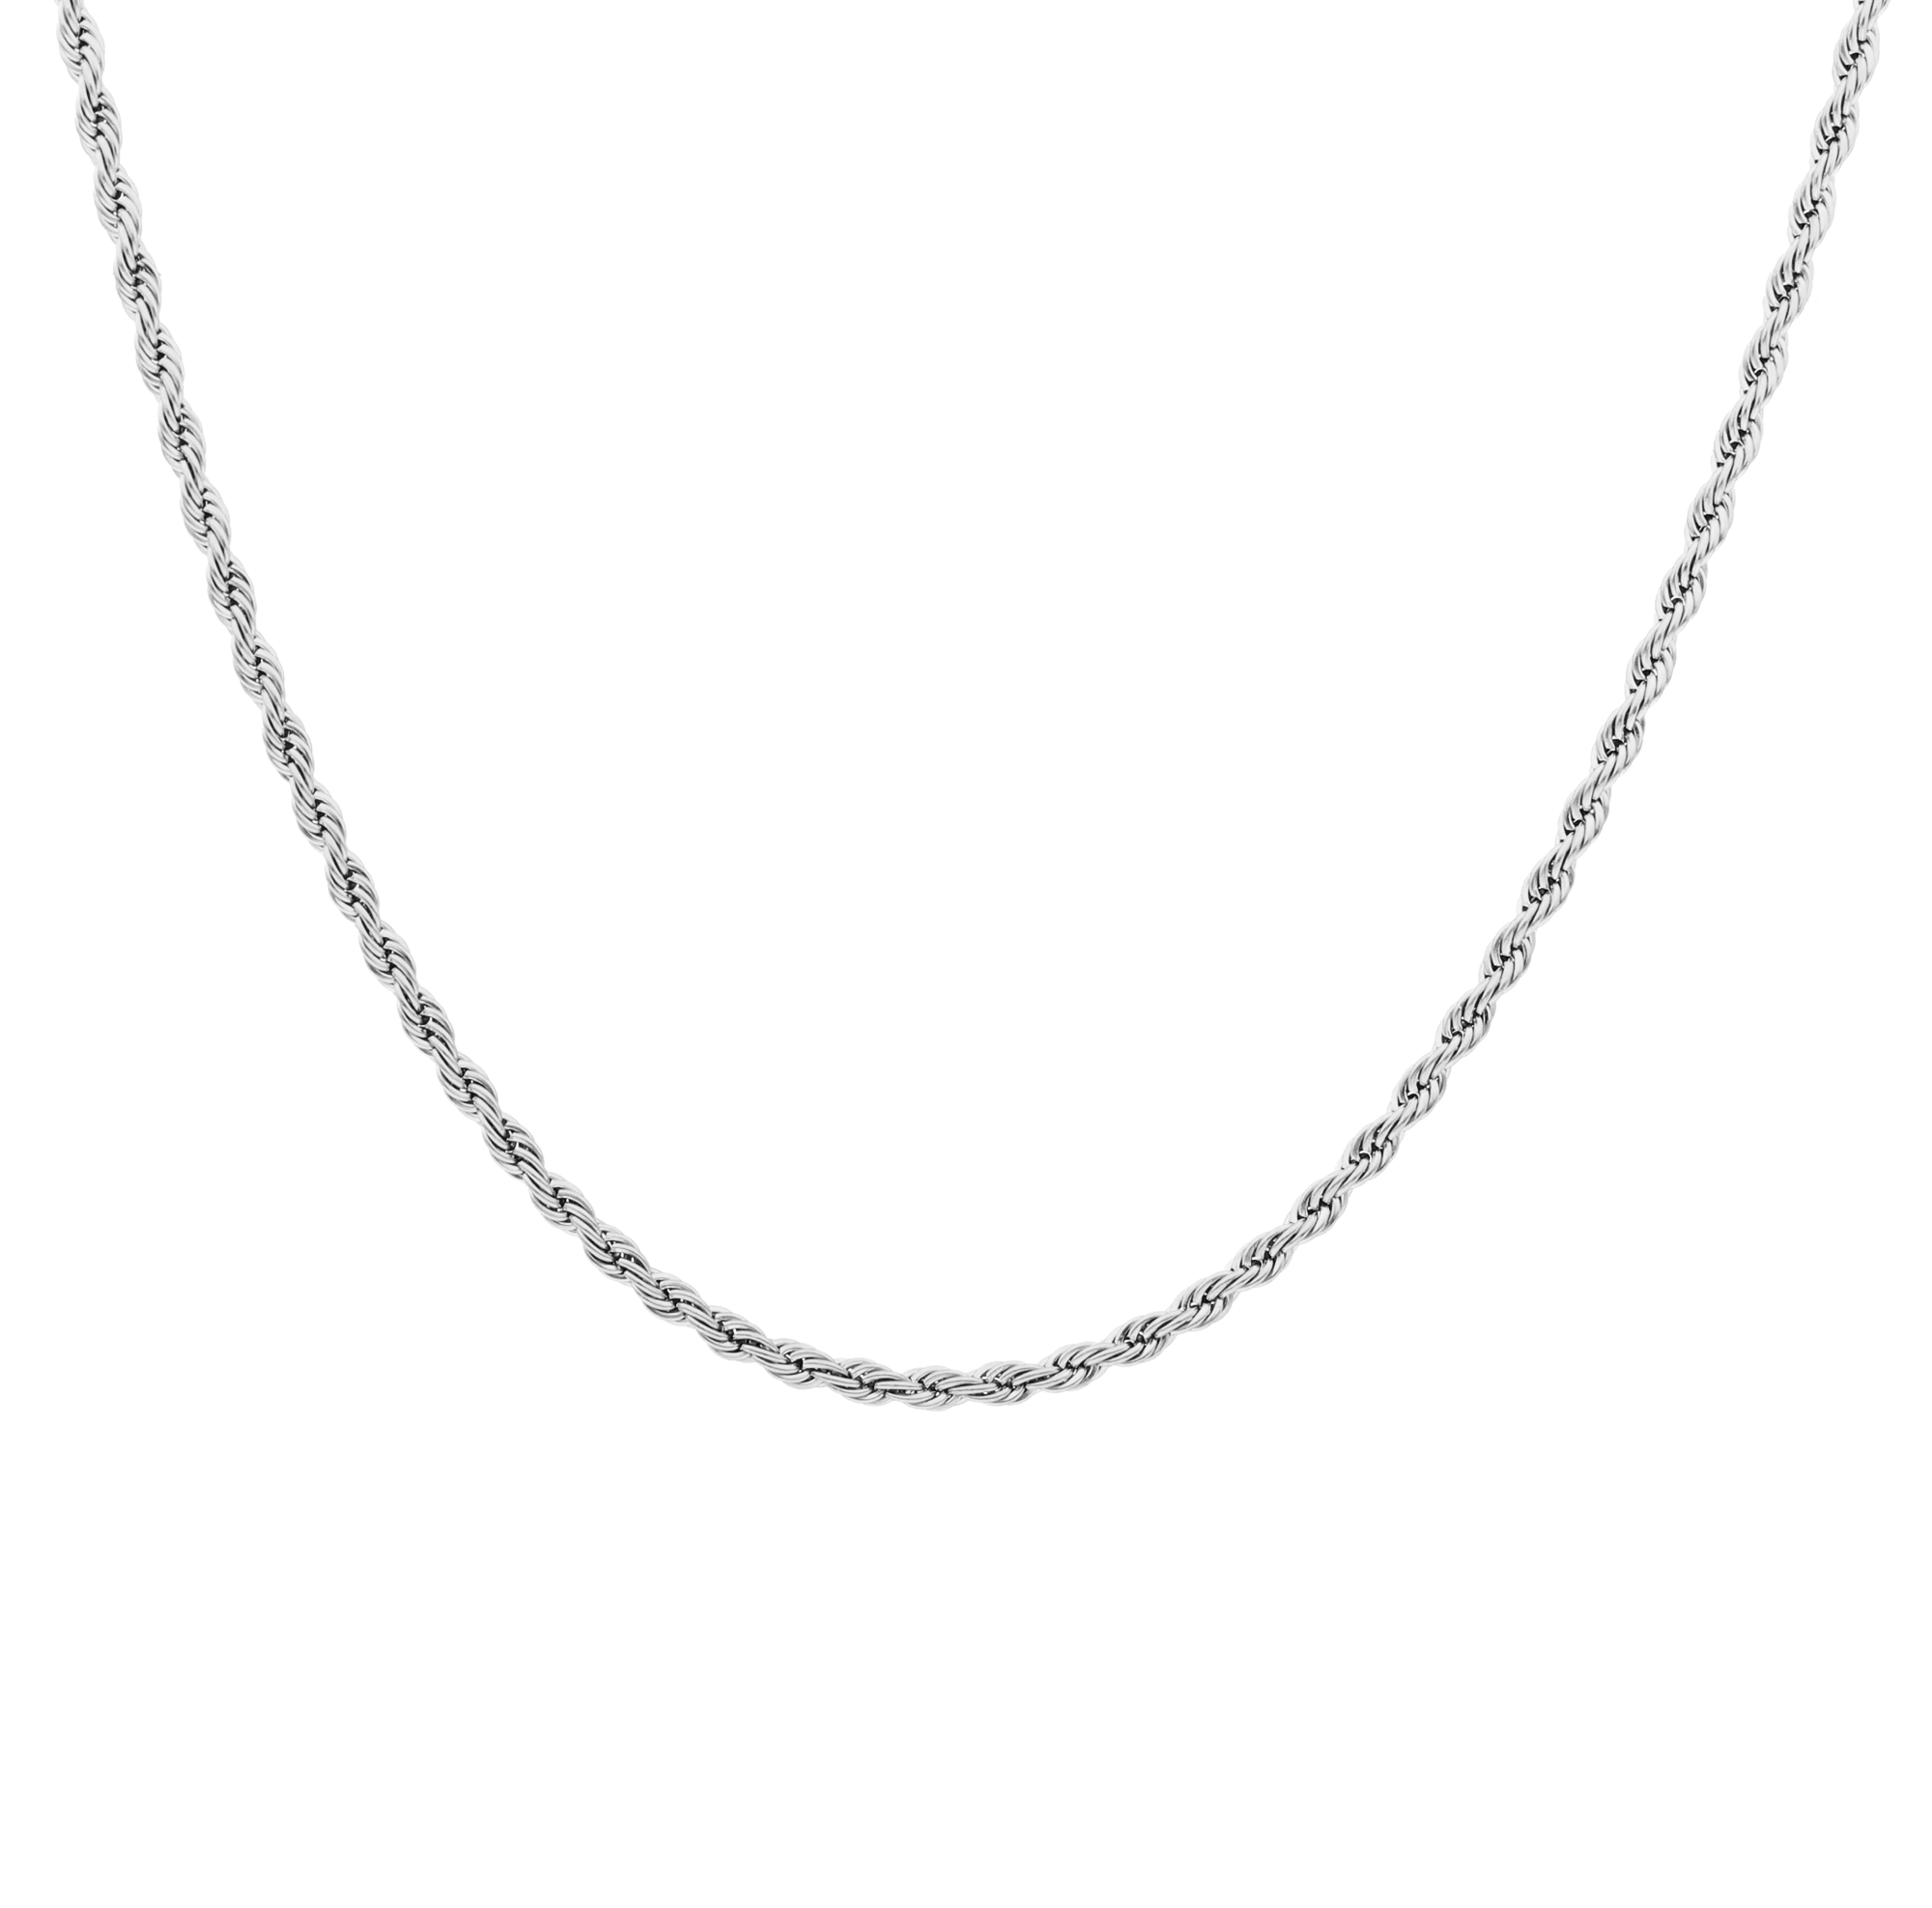 Baby Don men's necklace by Five Jwlry, crafted from a thin 2.5mm French rope twisted chain in silver-colored, water-resistant 316L stainless steel. Available in sizes 45cm, 50cm, and 55cm. Hypoallergenic with a 2-year warranty.